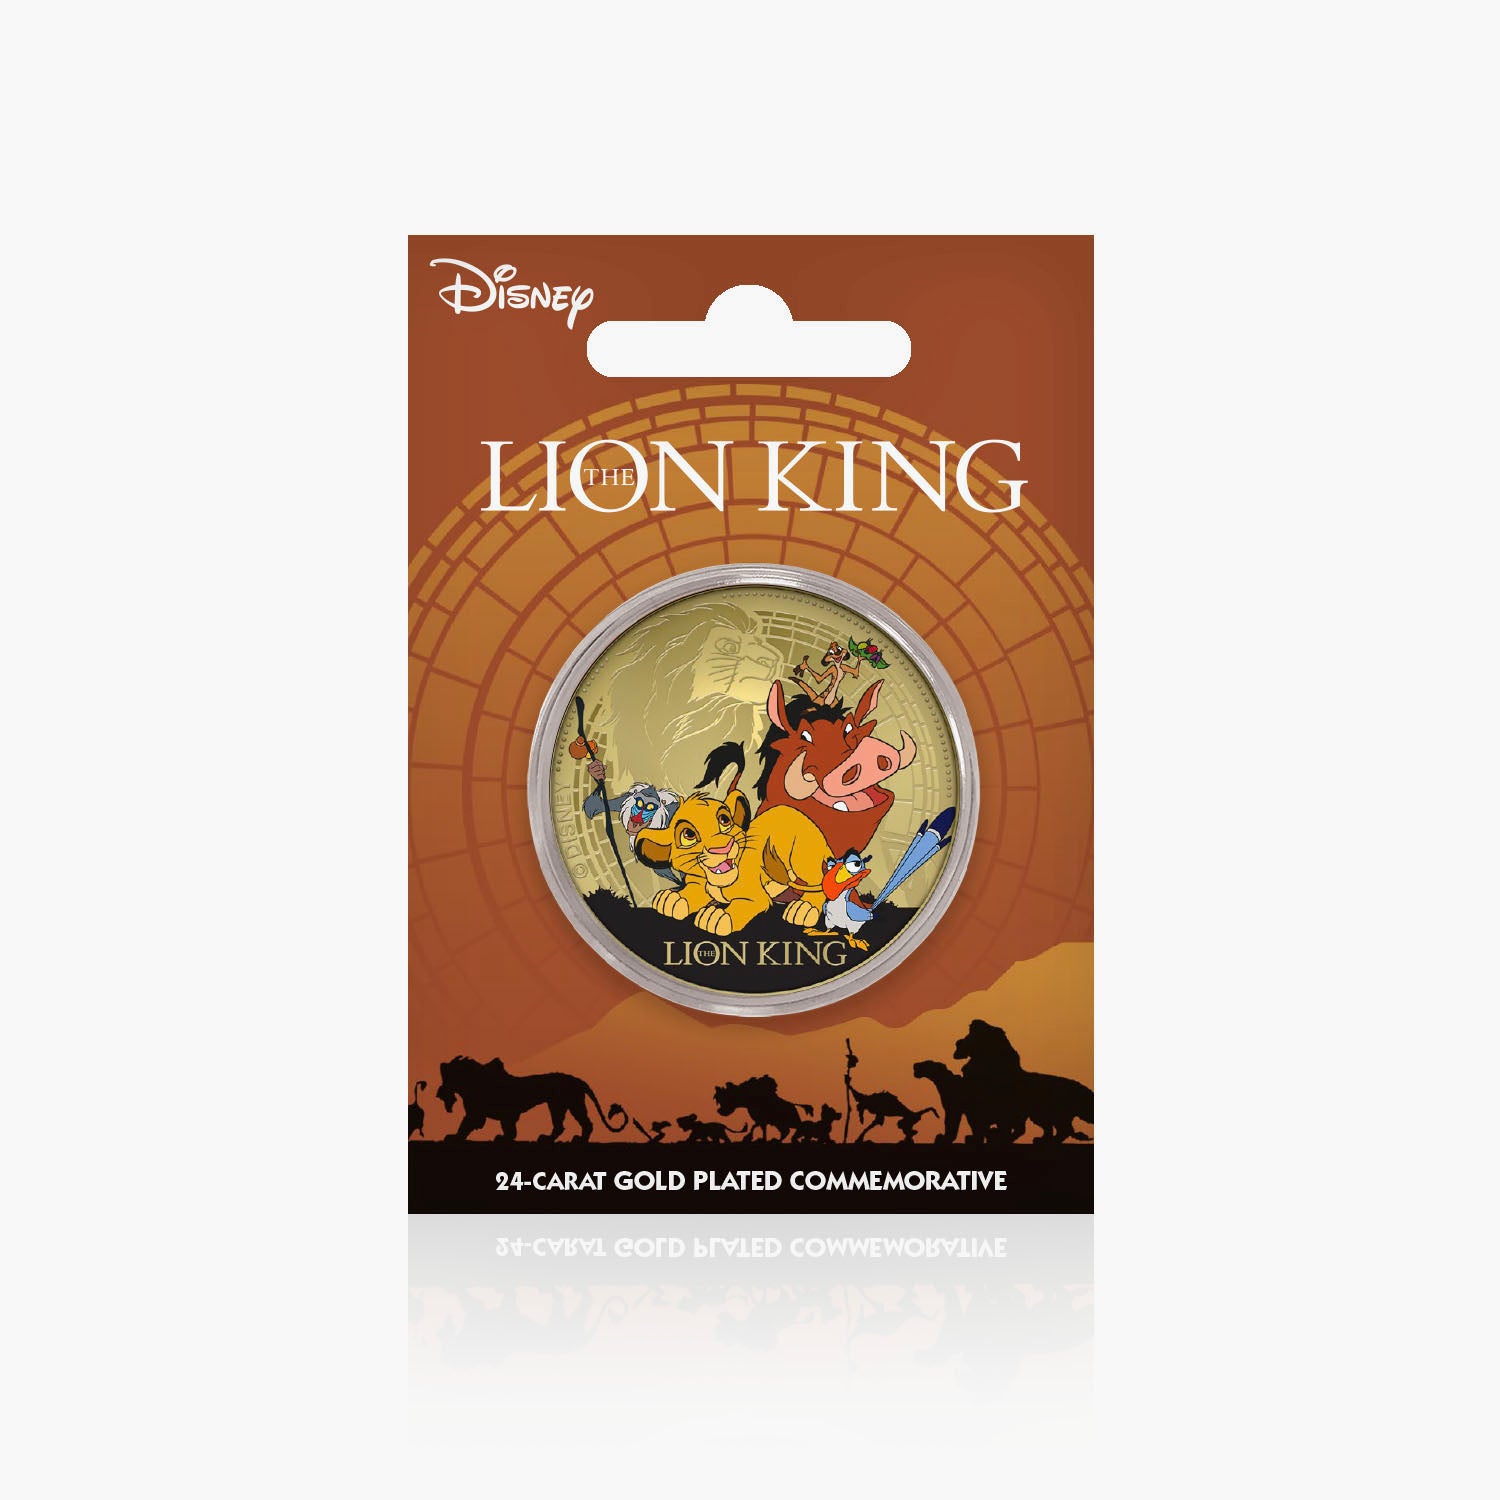 The Lion King Gold-Plated Commemorative